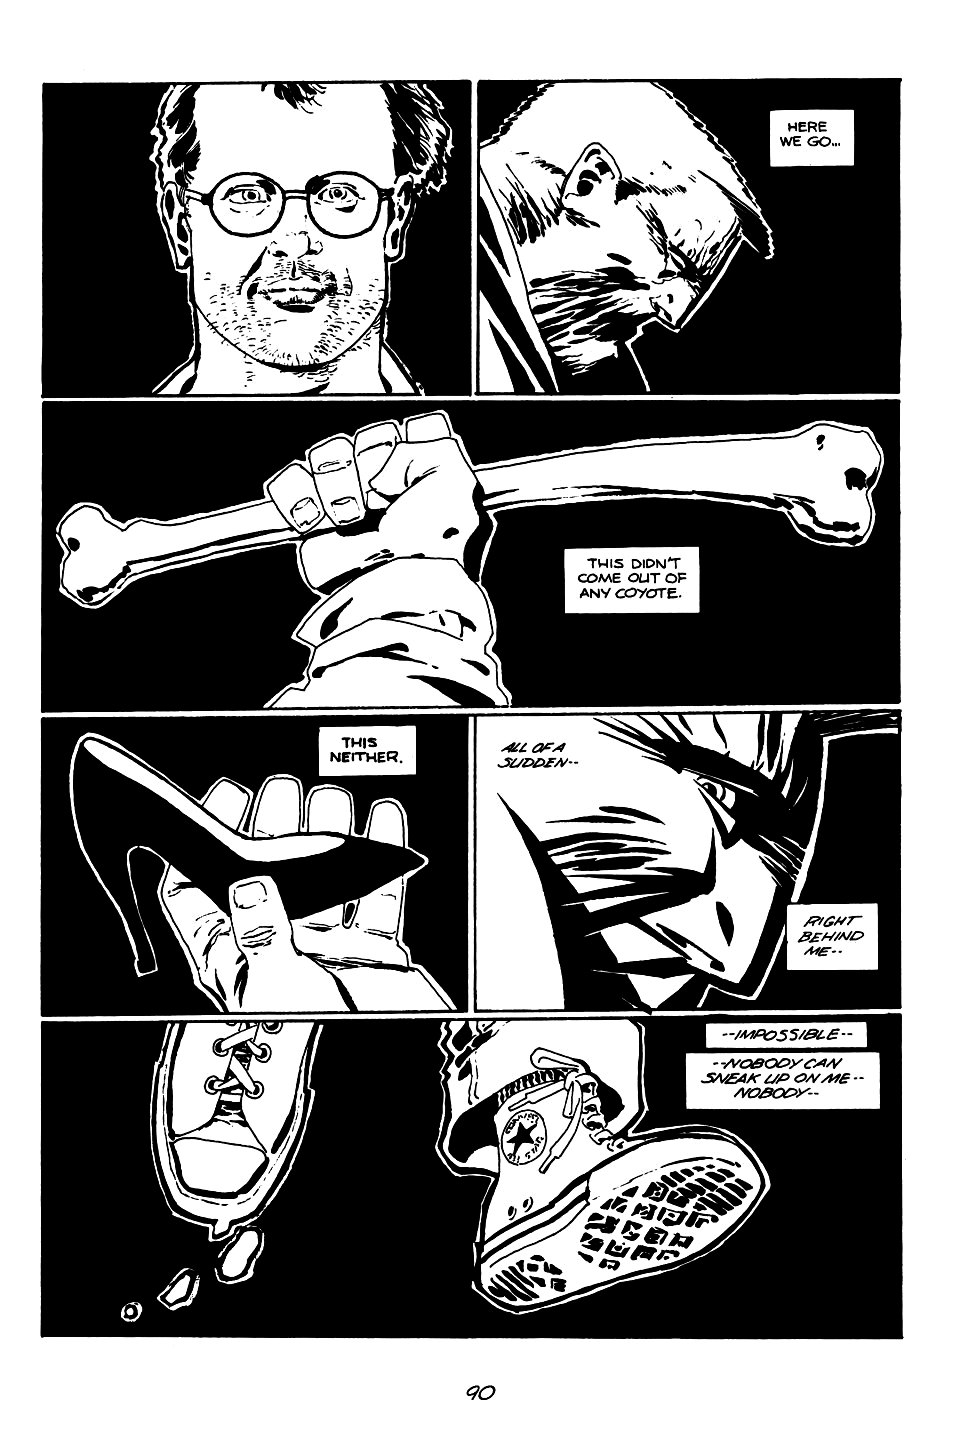 page 90 of sin city 1 the hard goodbye